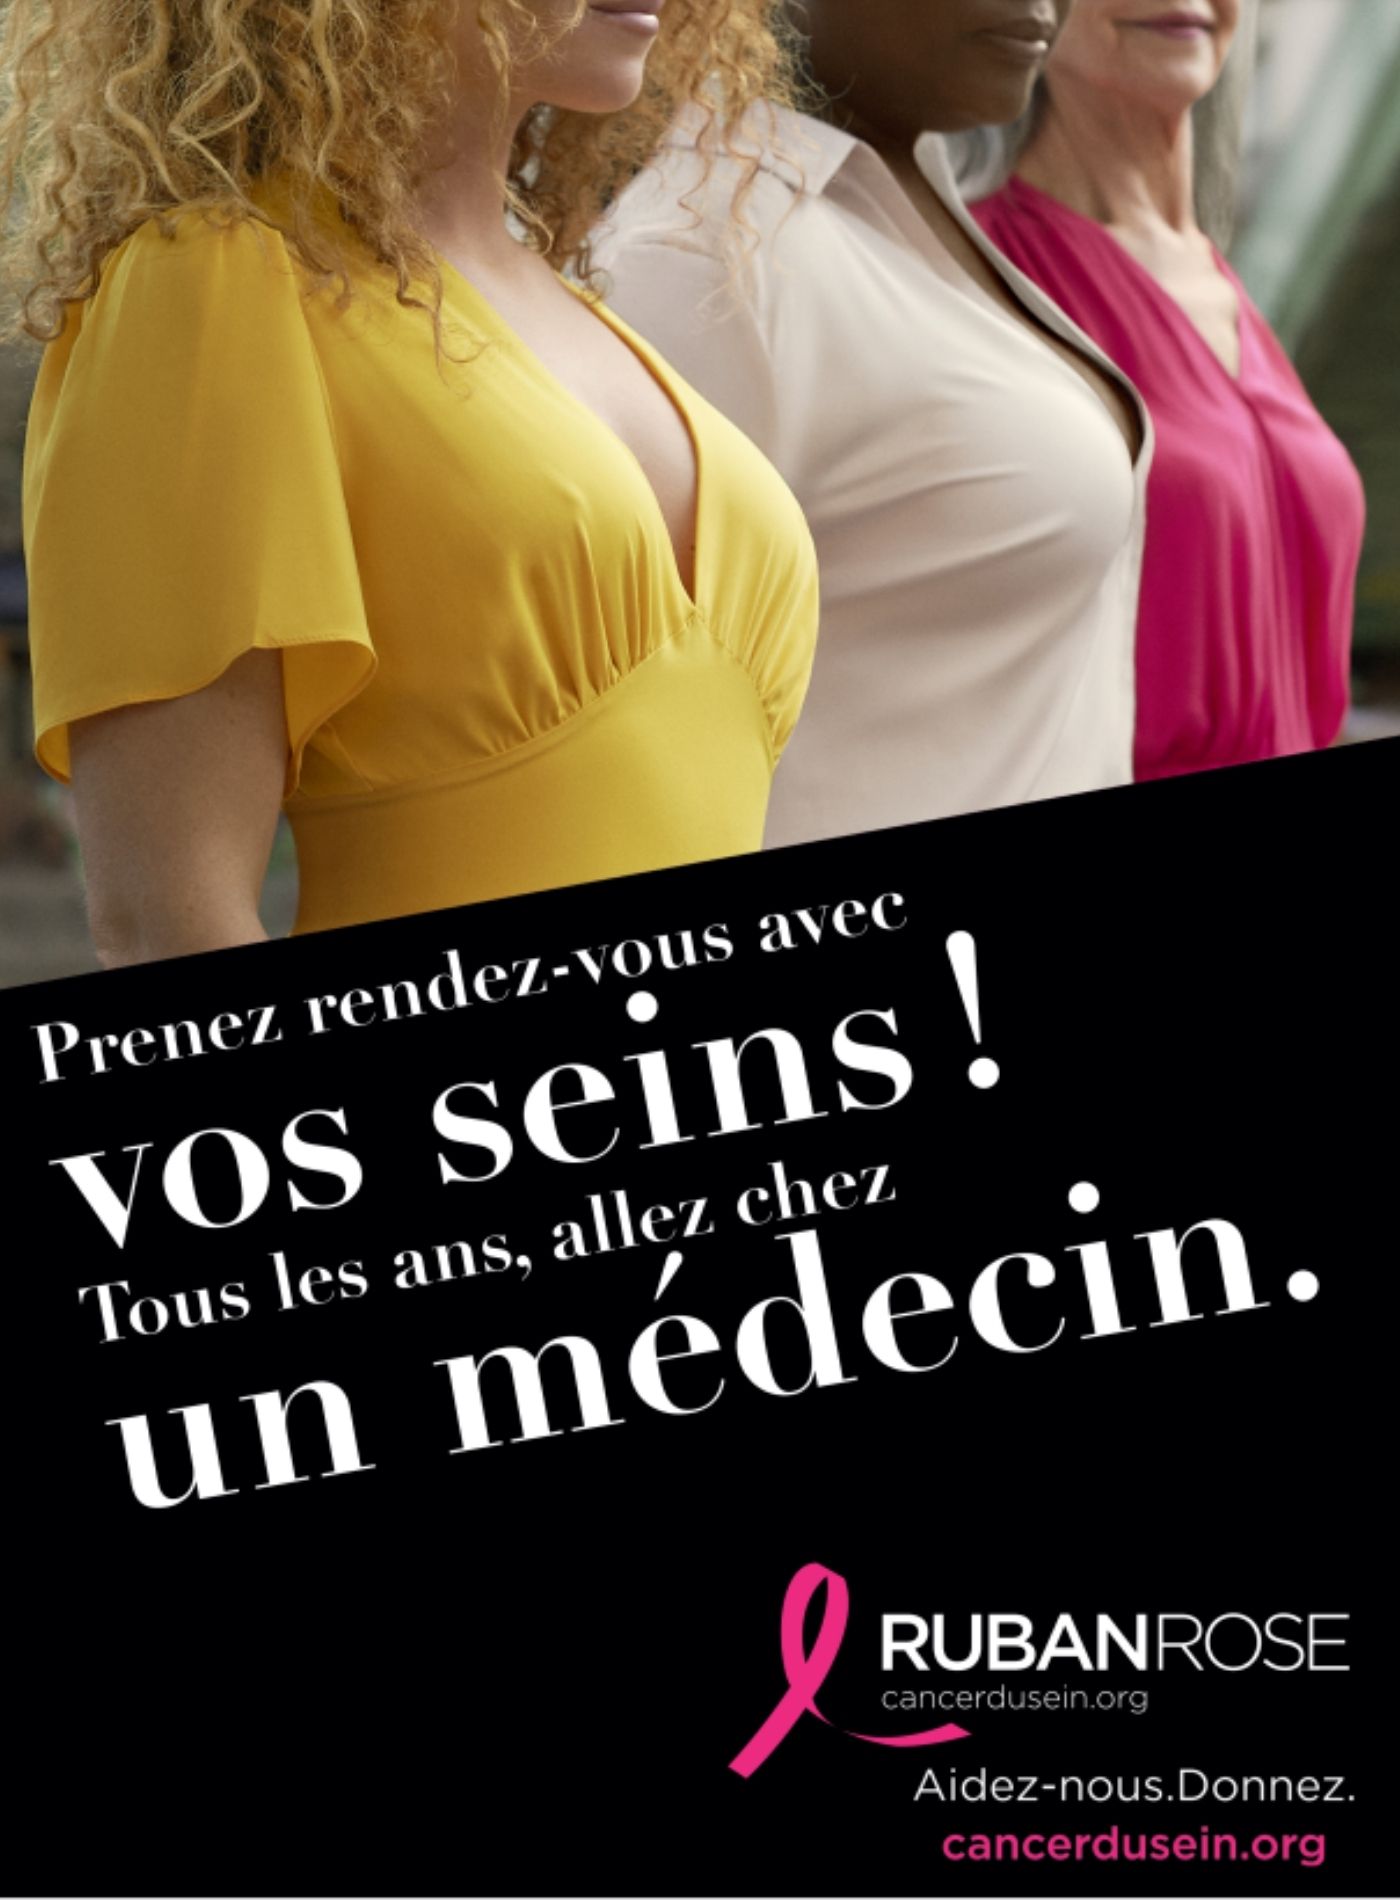 Breast Cancer Awareness Campaign Poster for October Ros